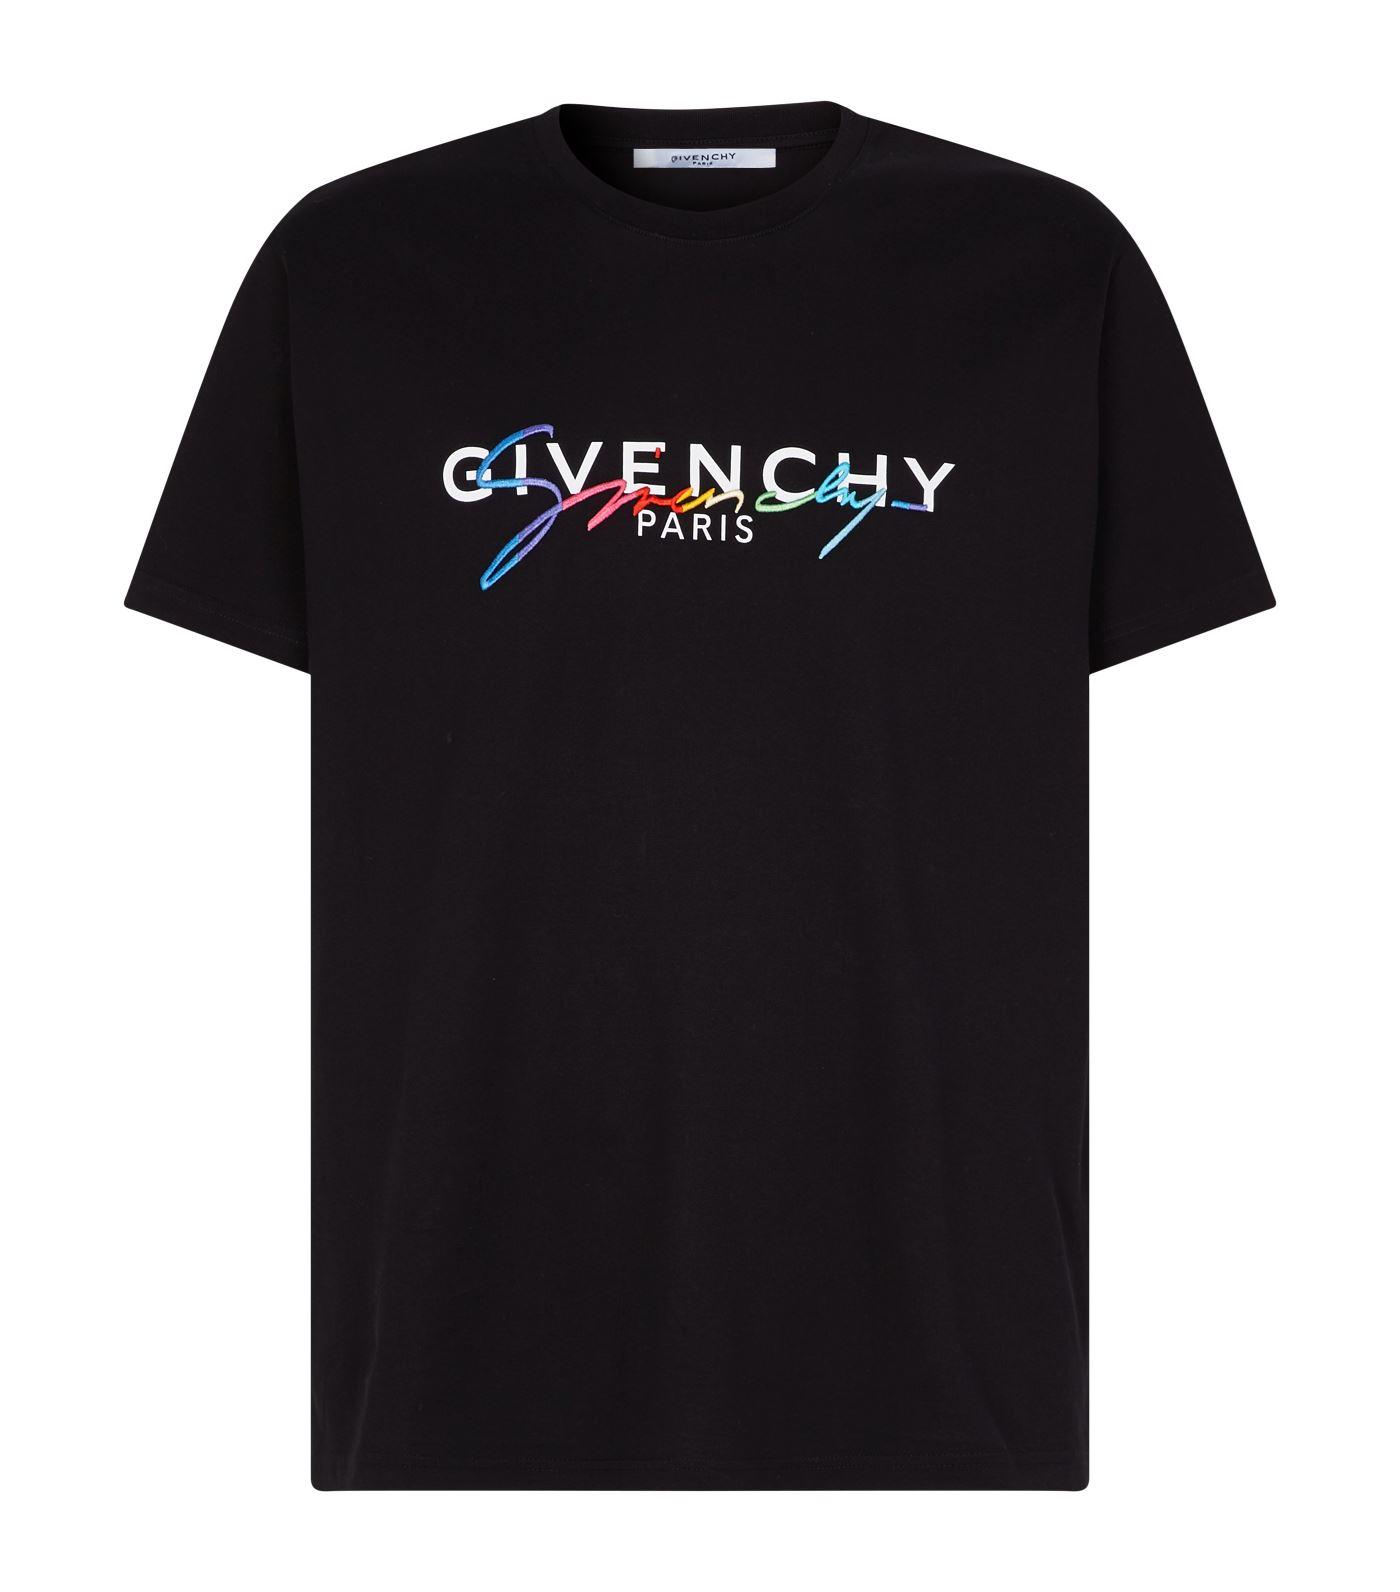 Givenchy Double Logo T-shirt in Black for Men - Save 26% - Lyst